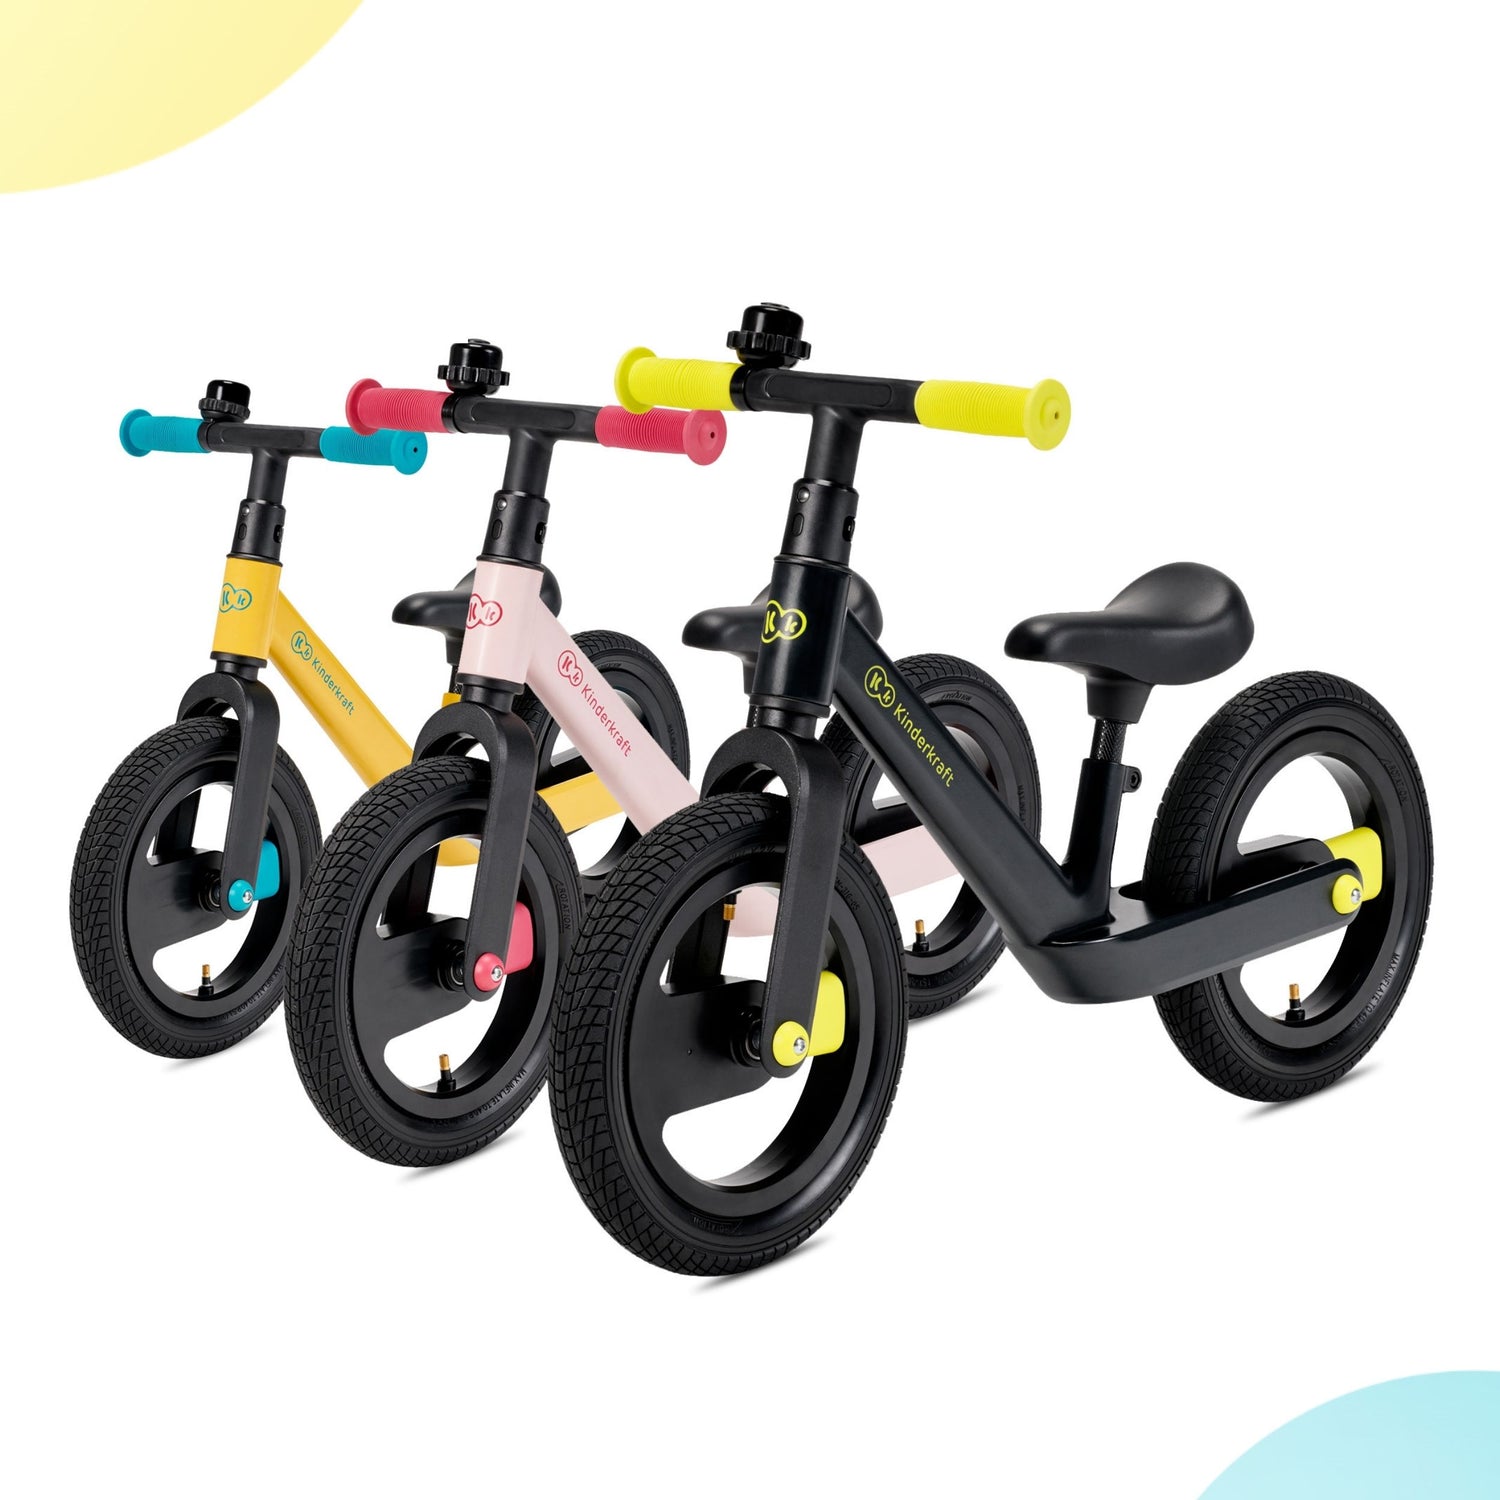 3 kinderkraft goswift balance bikes in black, pink and yellow next to each other